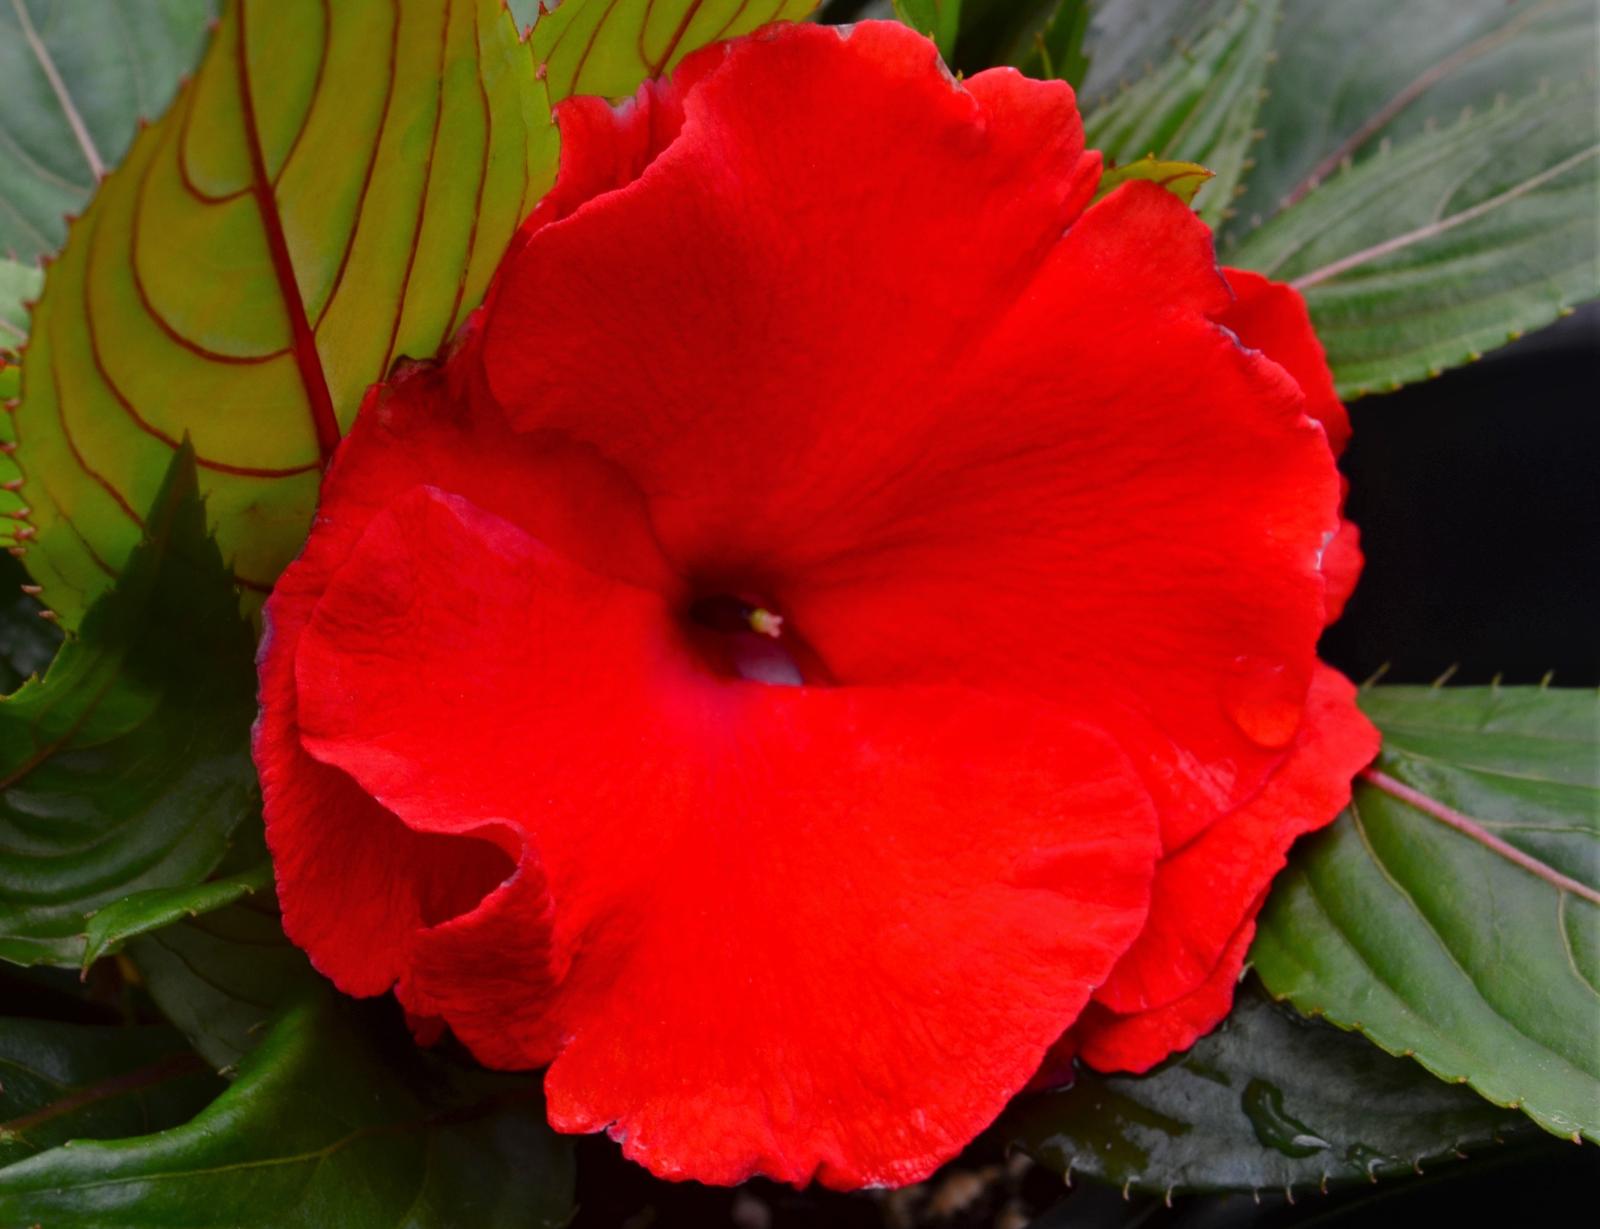 Impatiens hawkeri Roller Coaster 'Red Racer' - Impatiens New Guinea RC Red Racer from Hillcrest Nursery